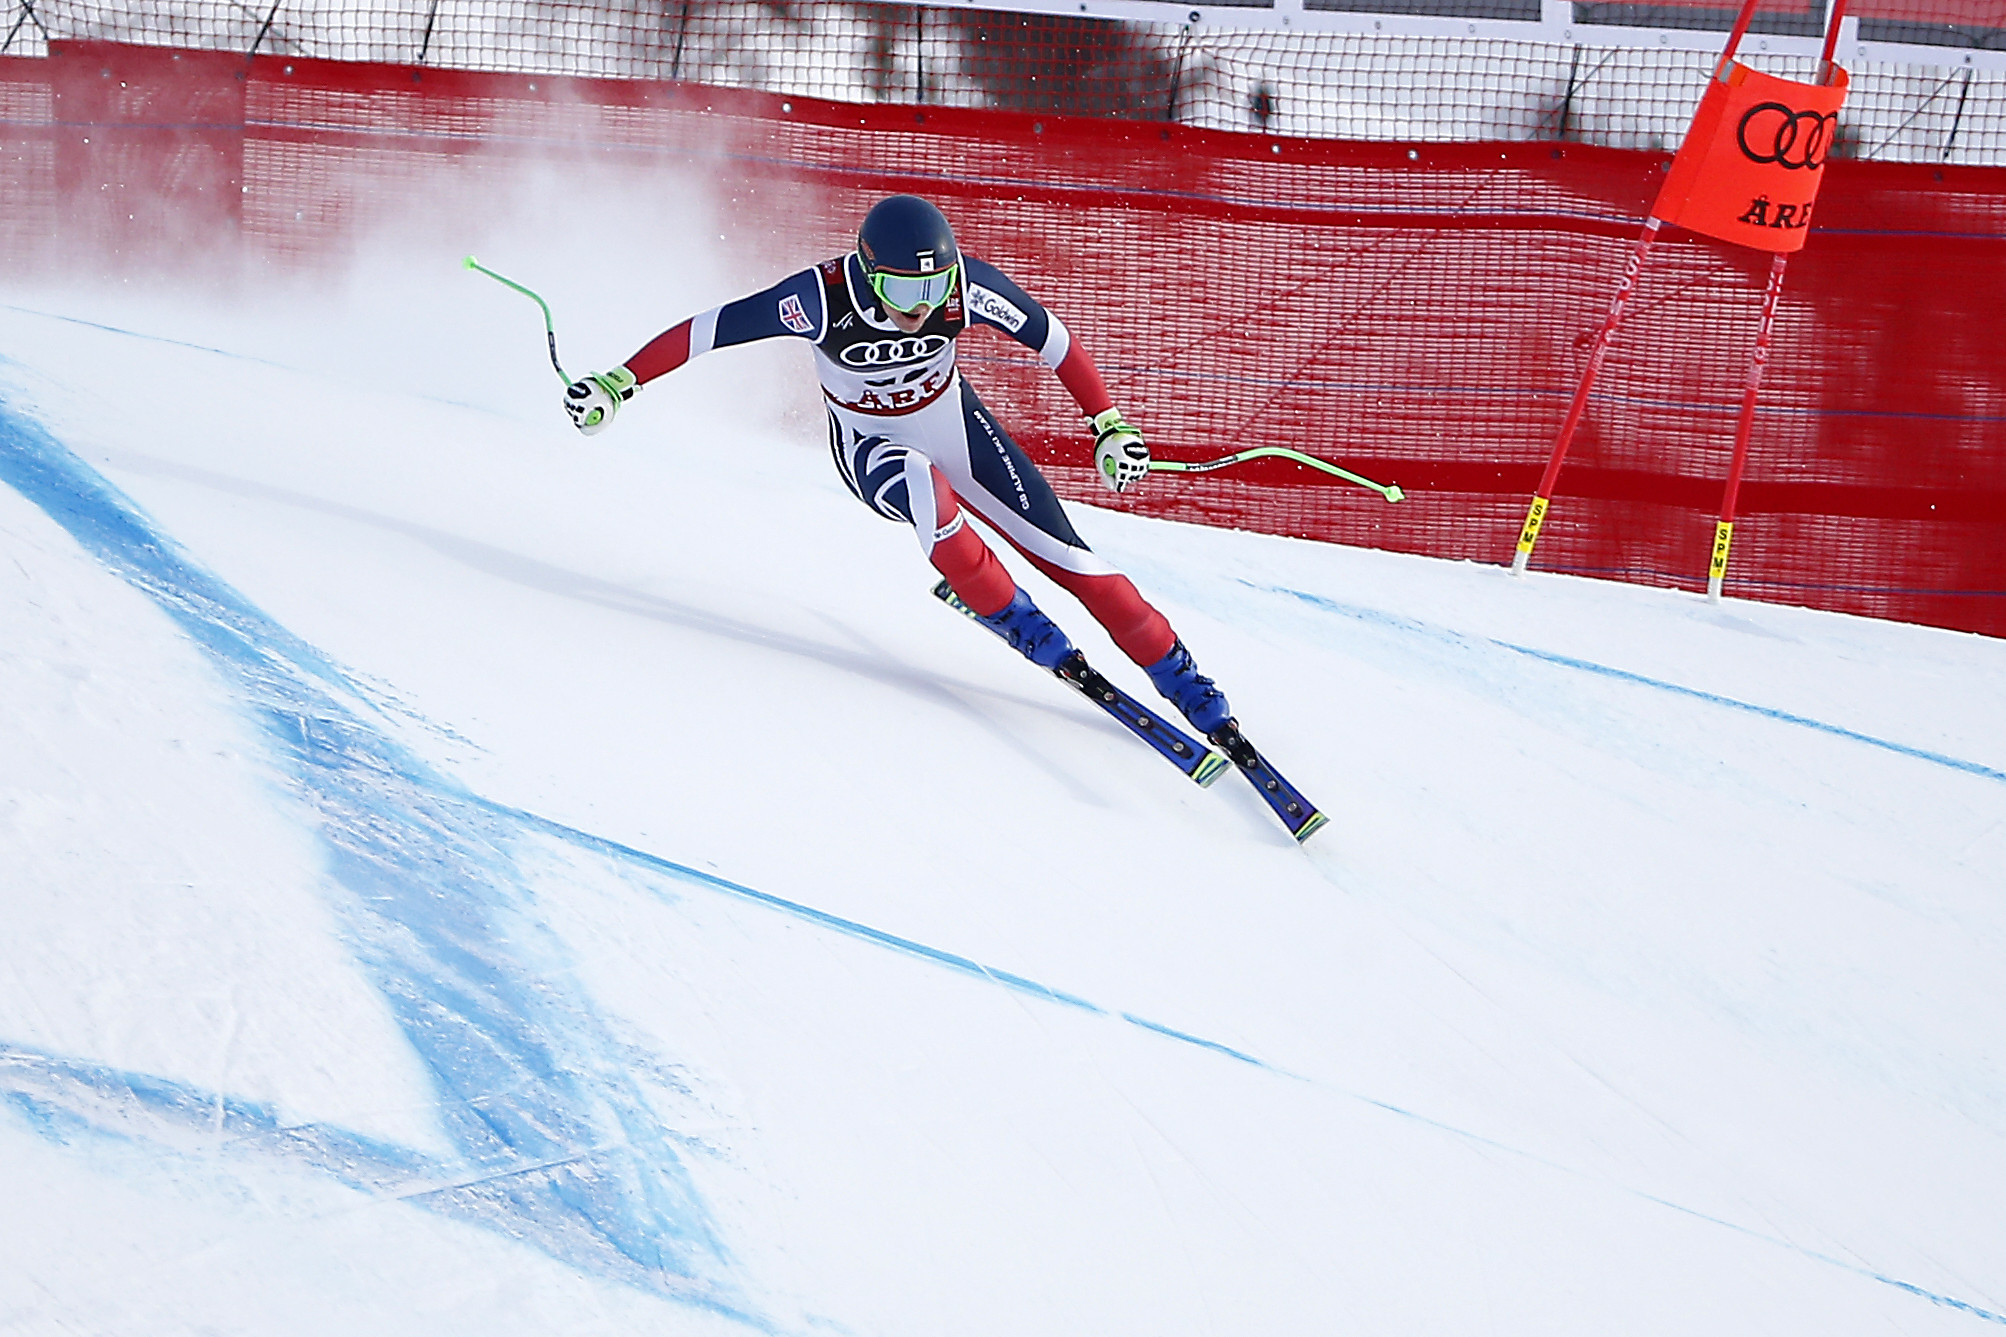 Two skiers were disqualified, one of whom was Great Britain's Jack Gower ©Getty Images